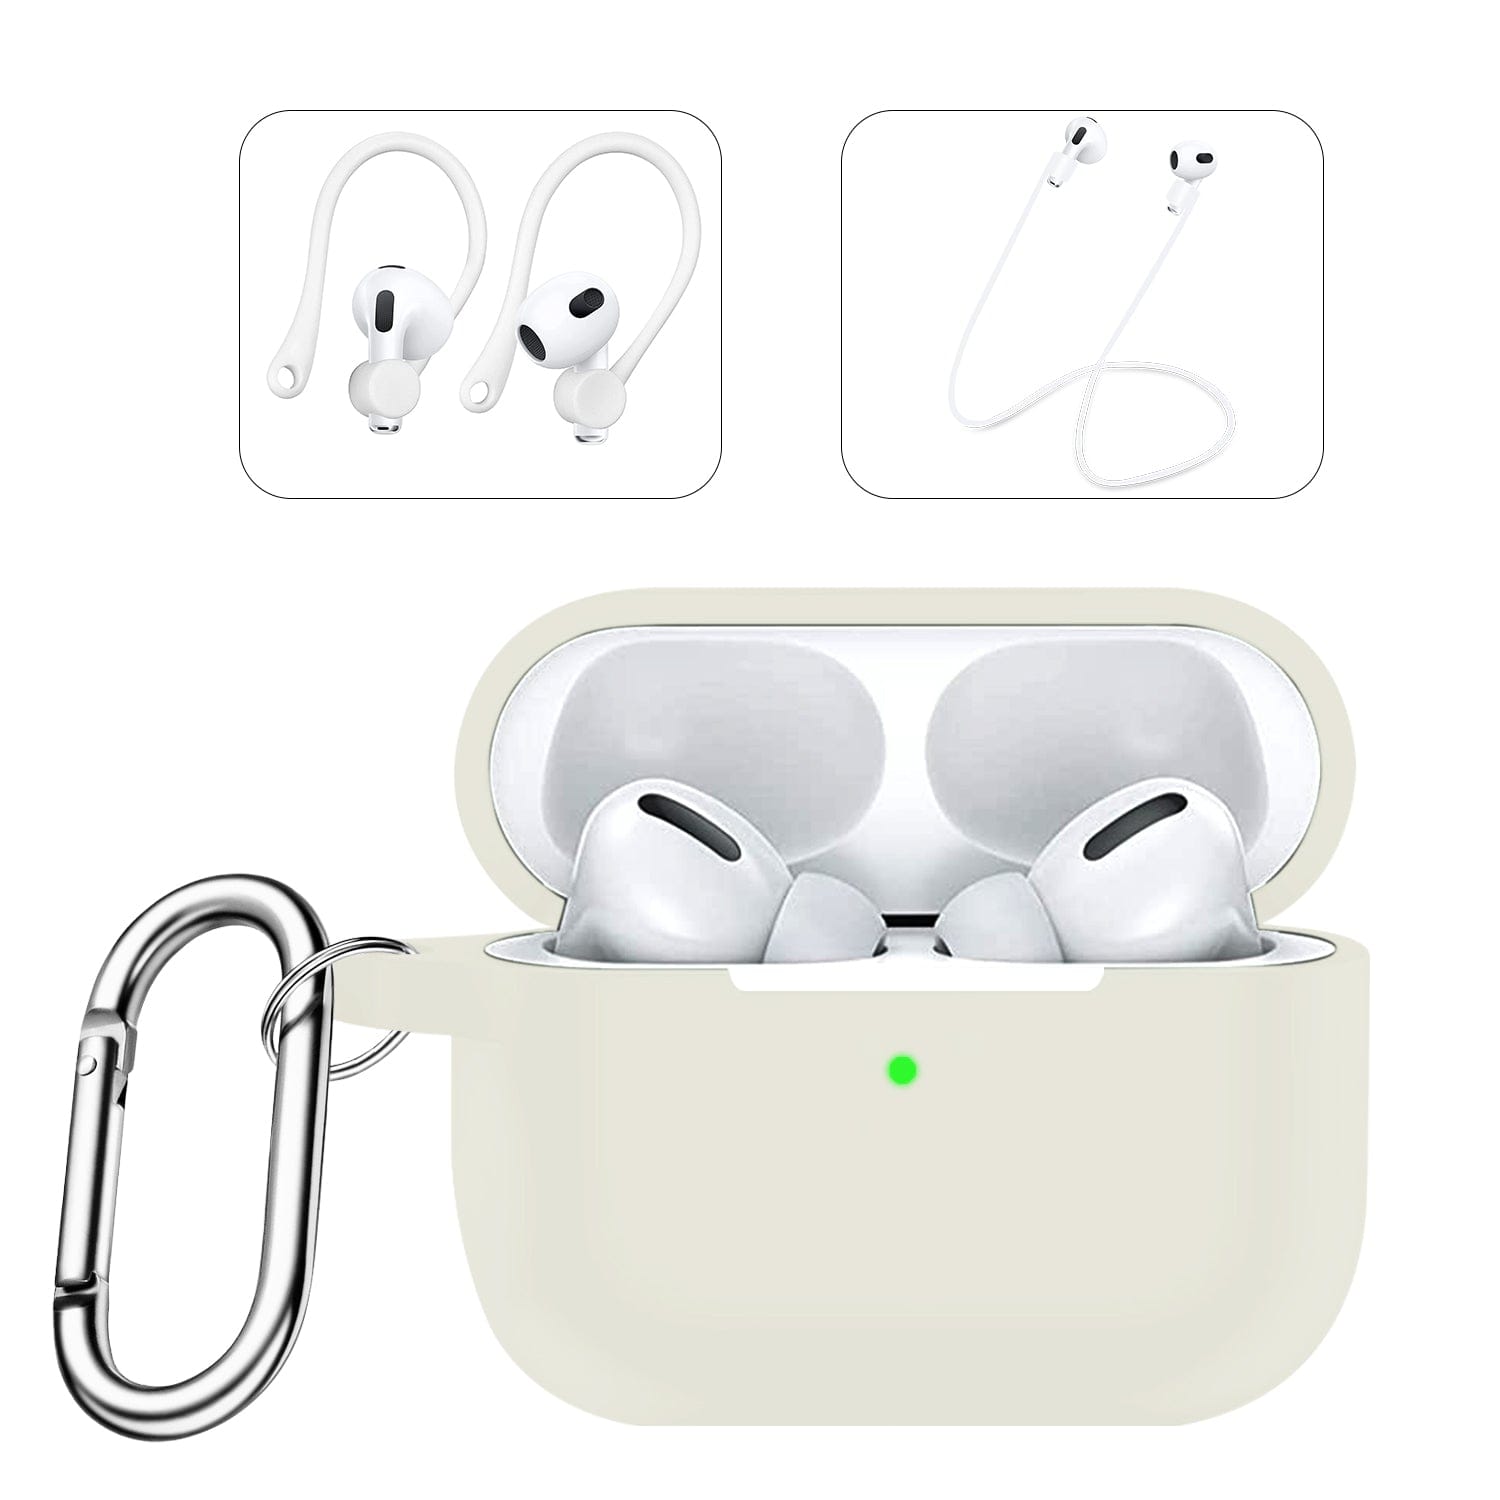 Silicone Case for AirPods Pro 2 (2nd Generation) - Glow White